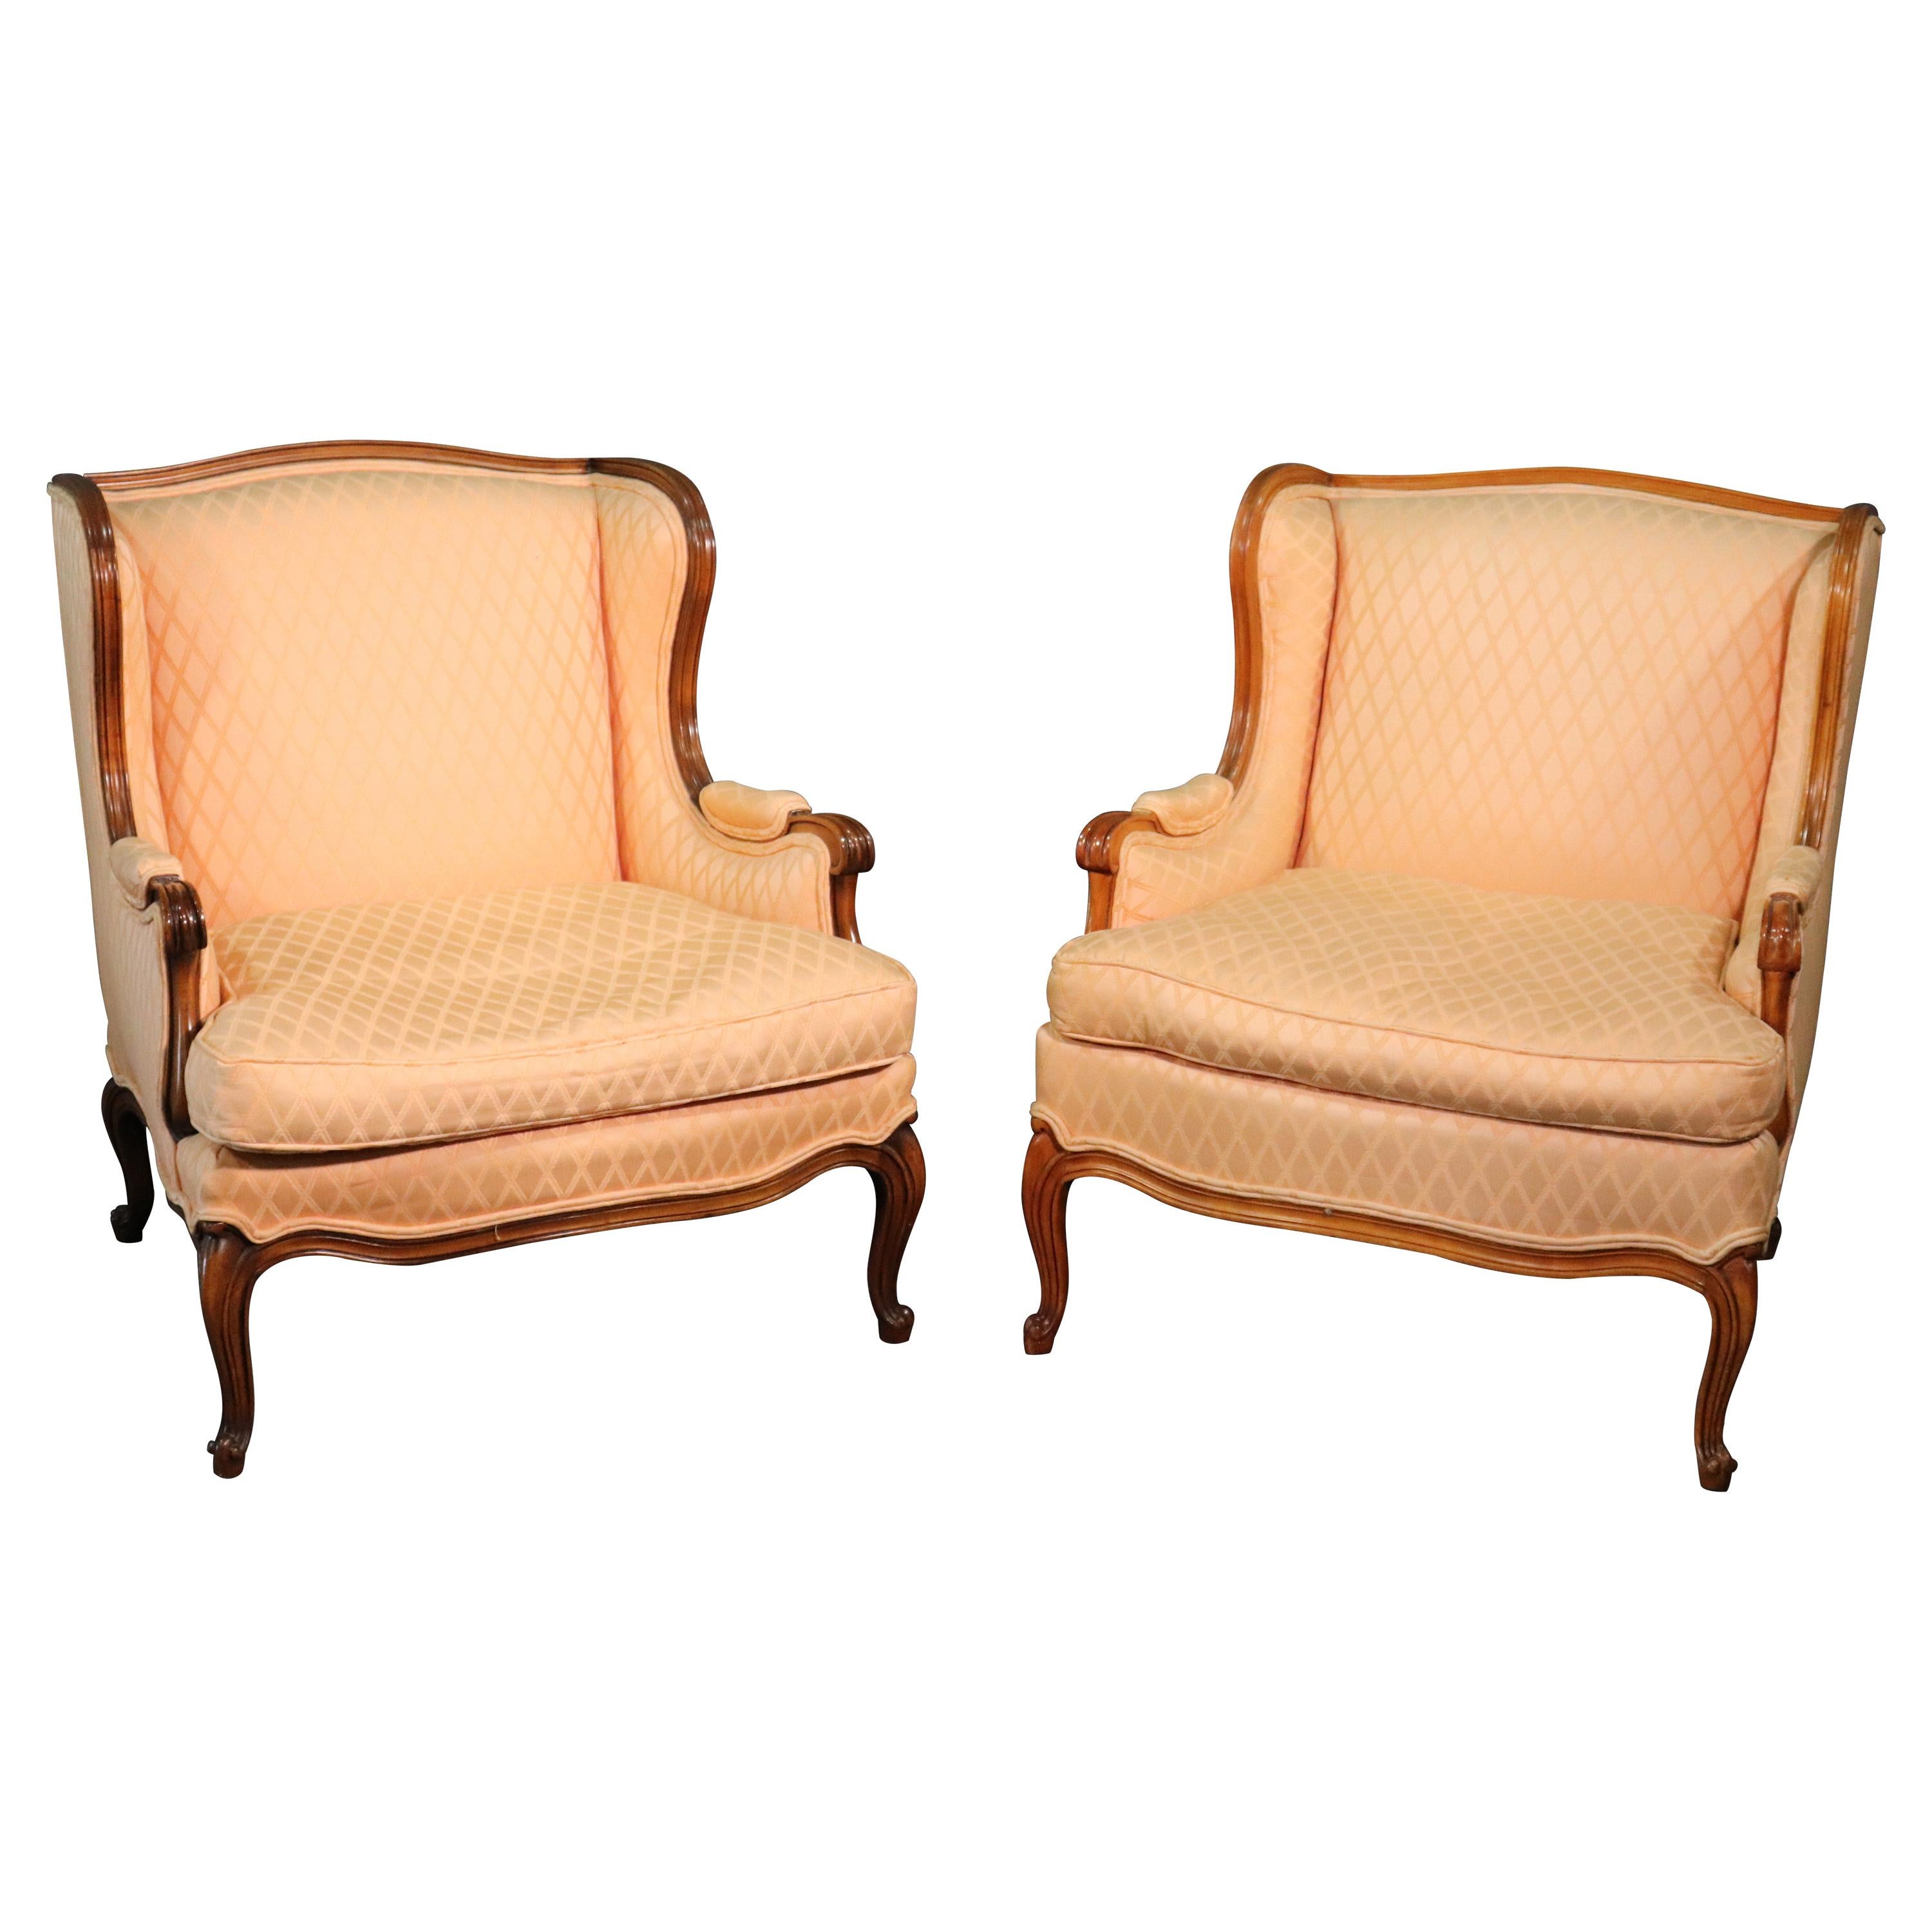 Pair of French Walnut Louis XV Bergere Fireside Lounge Chairs, circa 1950s